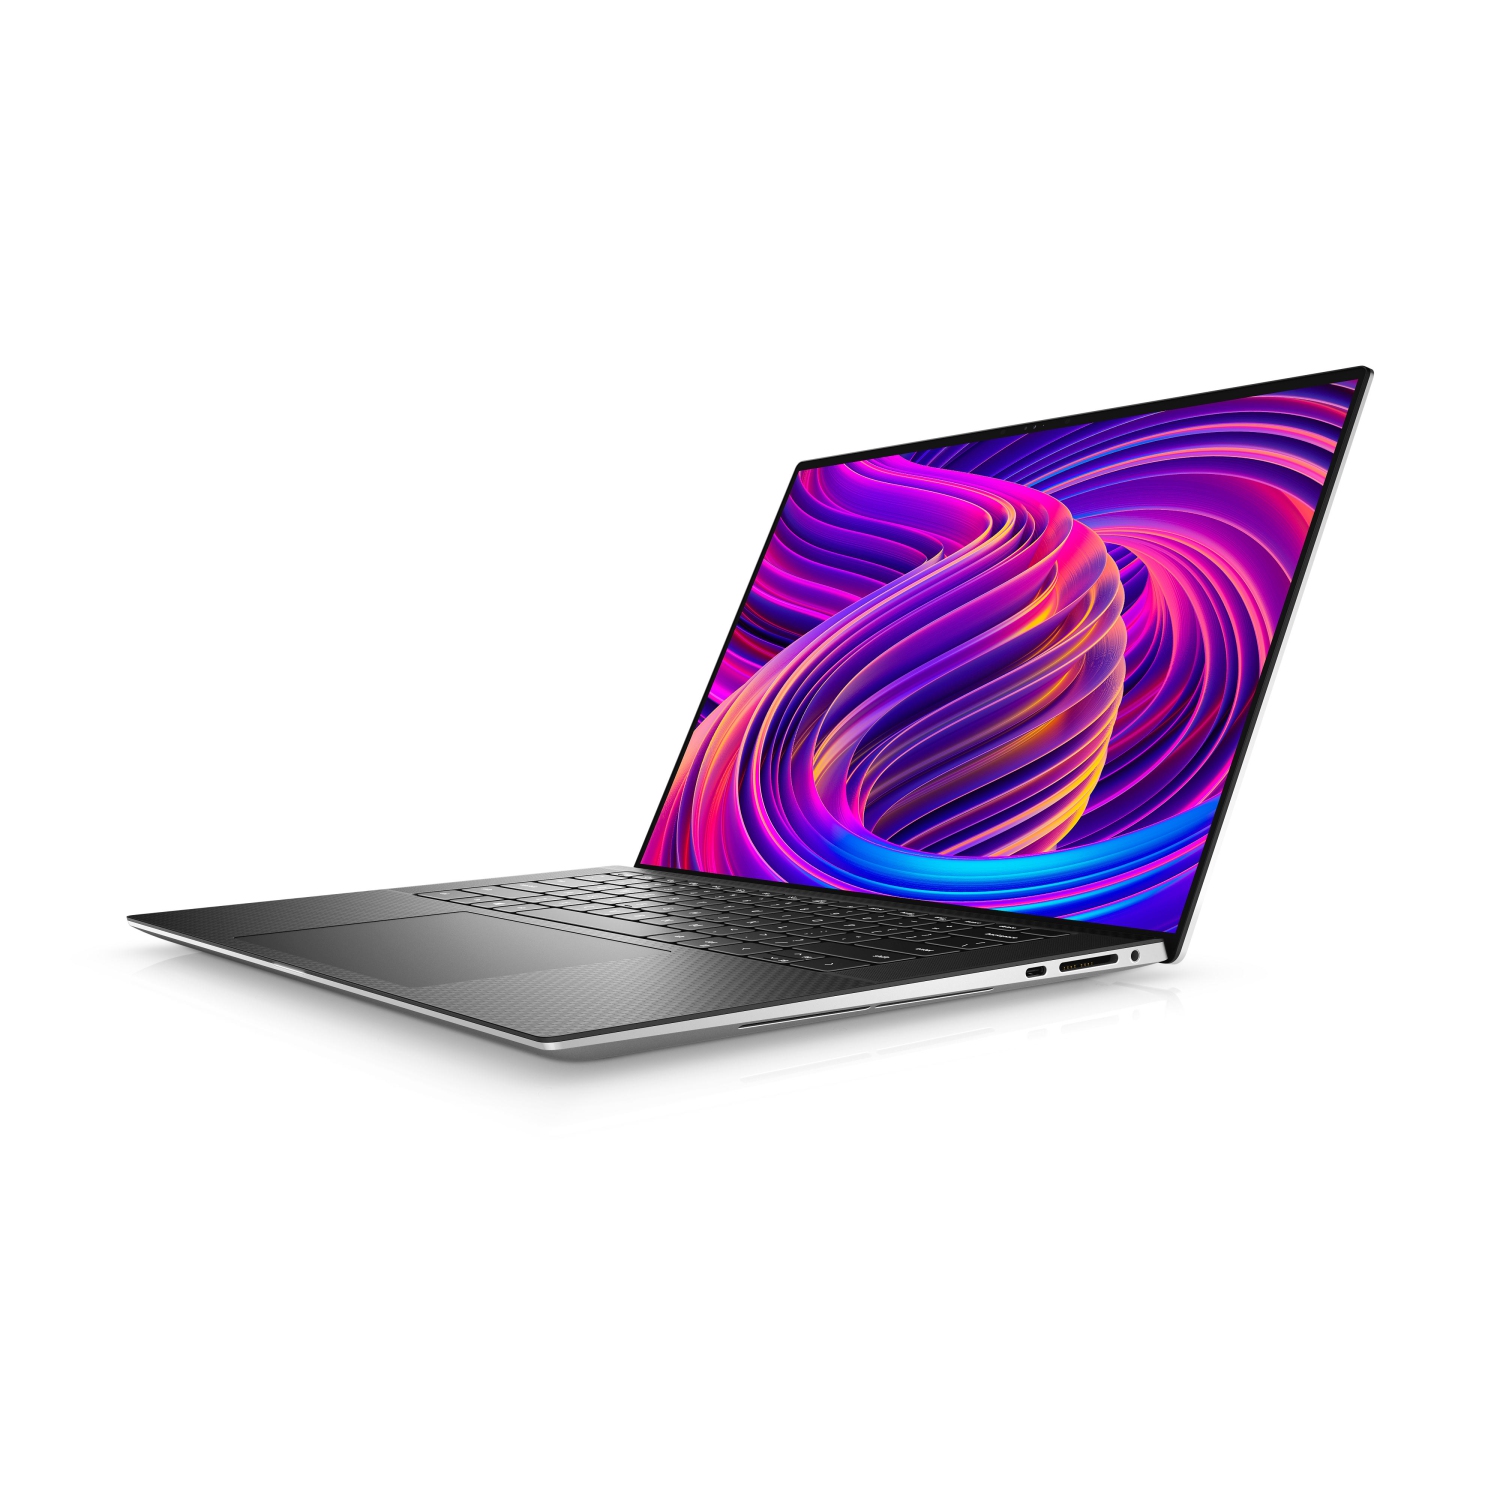 Refurbished (Excellent) - Dell XPS 15 9510 Laptop (2021) | 15.6" FHD+ | Core i7 - 1TB SSD - 16GB RAM - RTX 3050 | 8 Cores @ 4.6 GHz - 11th Gen CPU Certified Refurbished